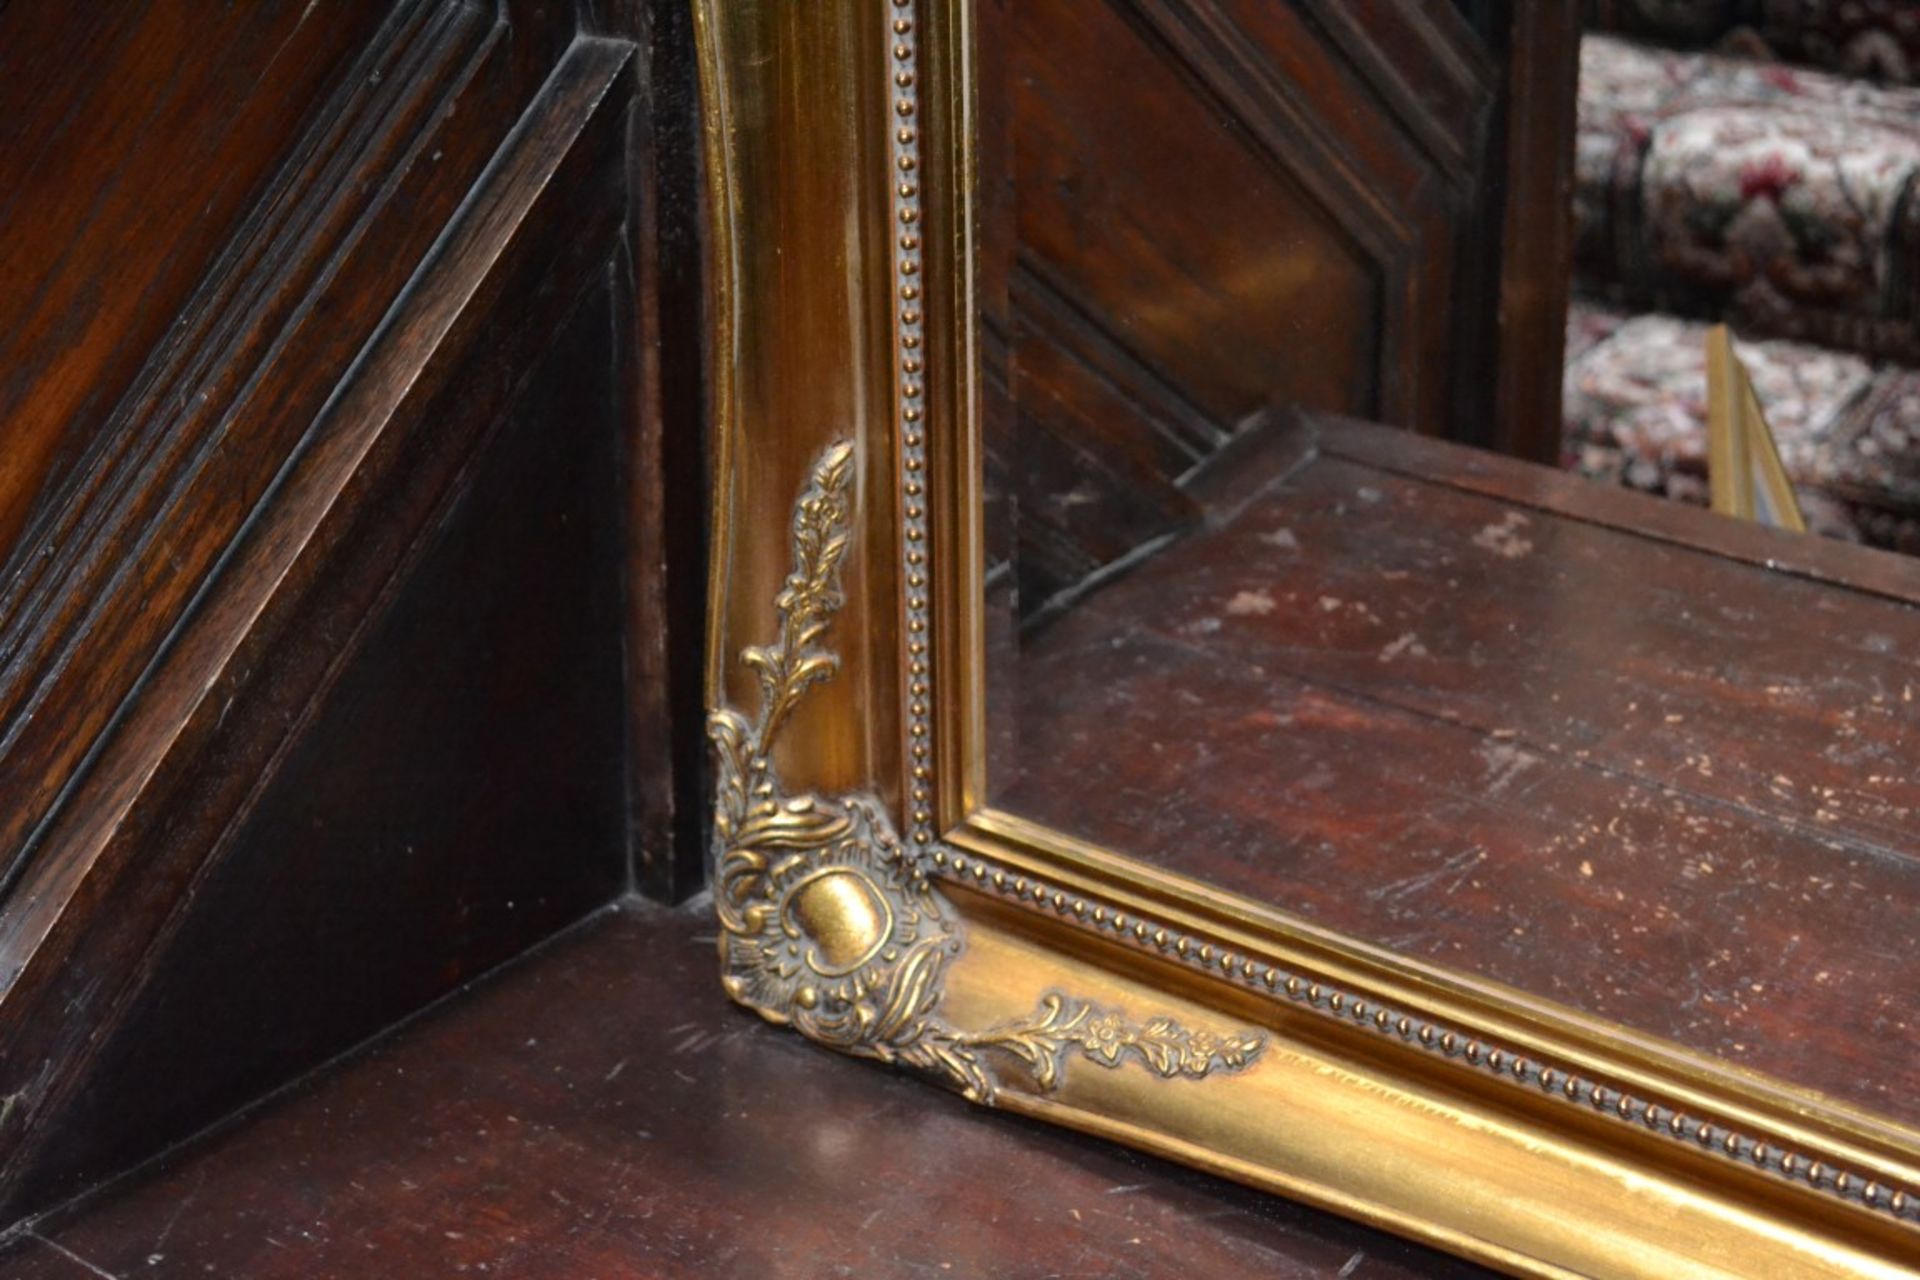 1 x Very Large Gilt Framed Mirror - From A Grade II Listed Hall In Great Condition - Dimensions: - Image 2 of 3